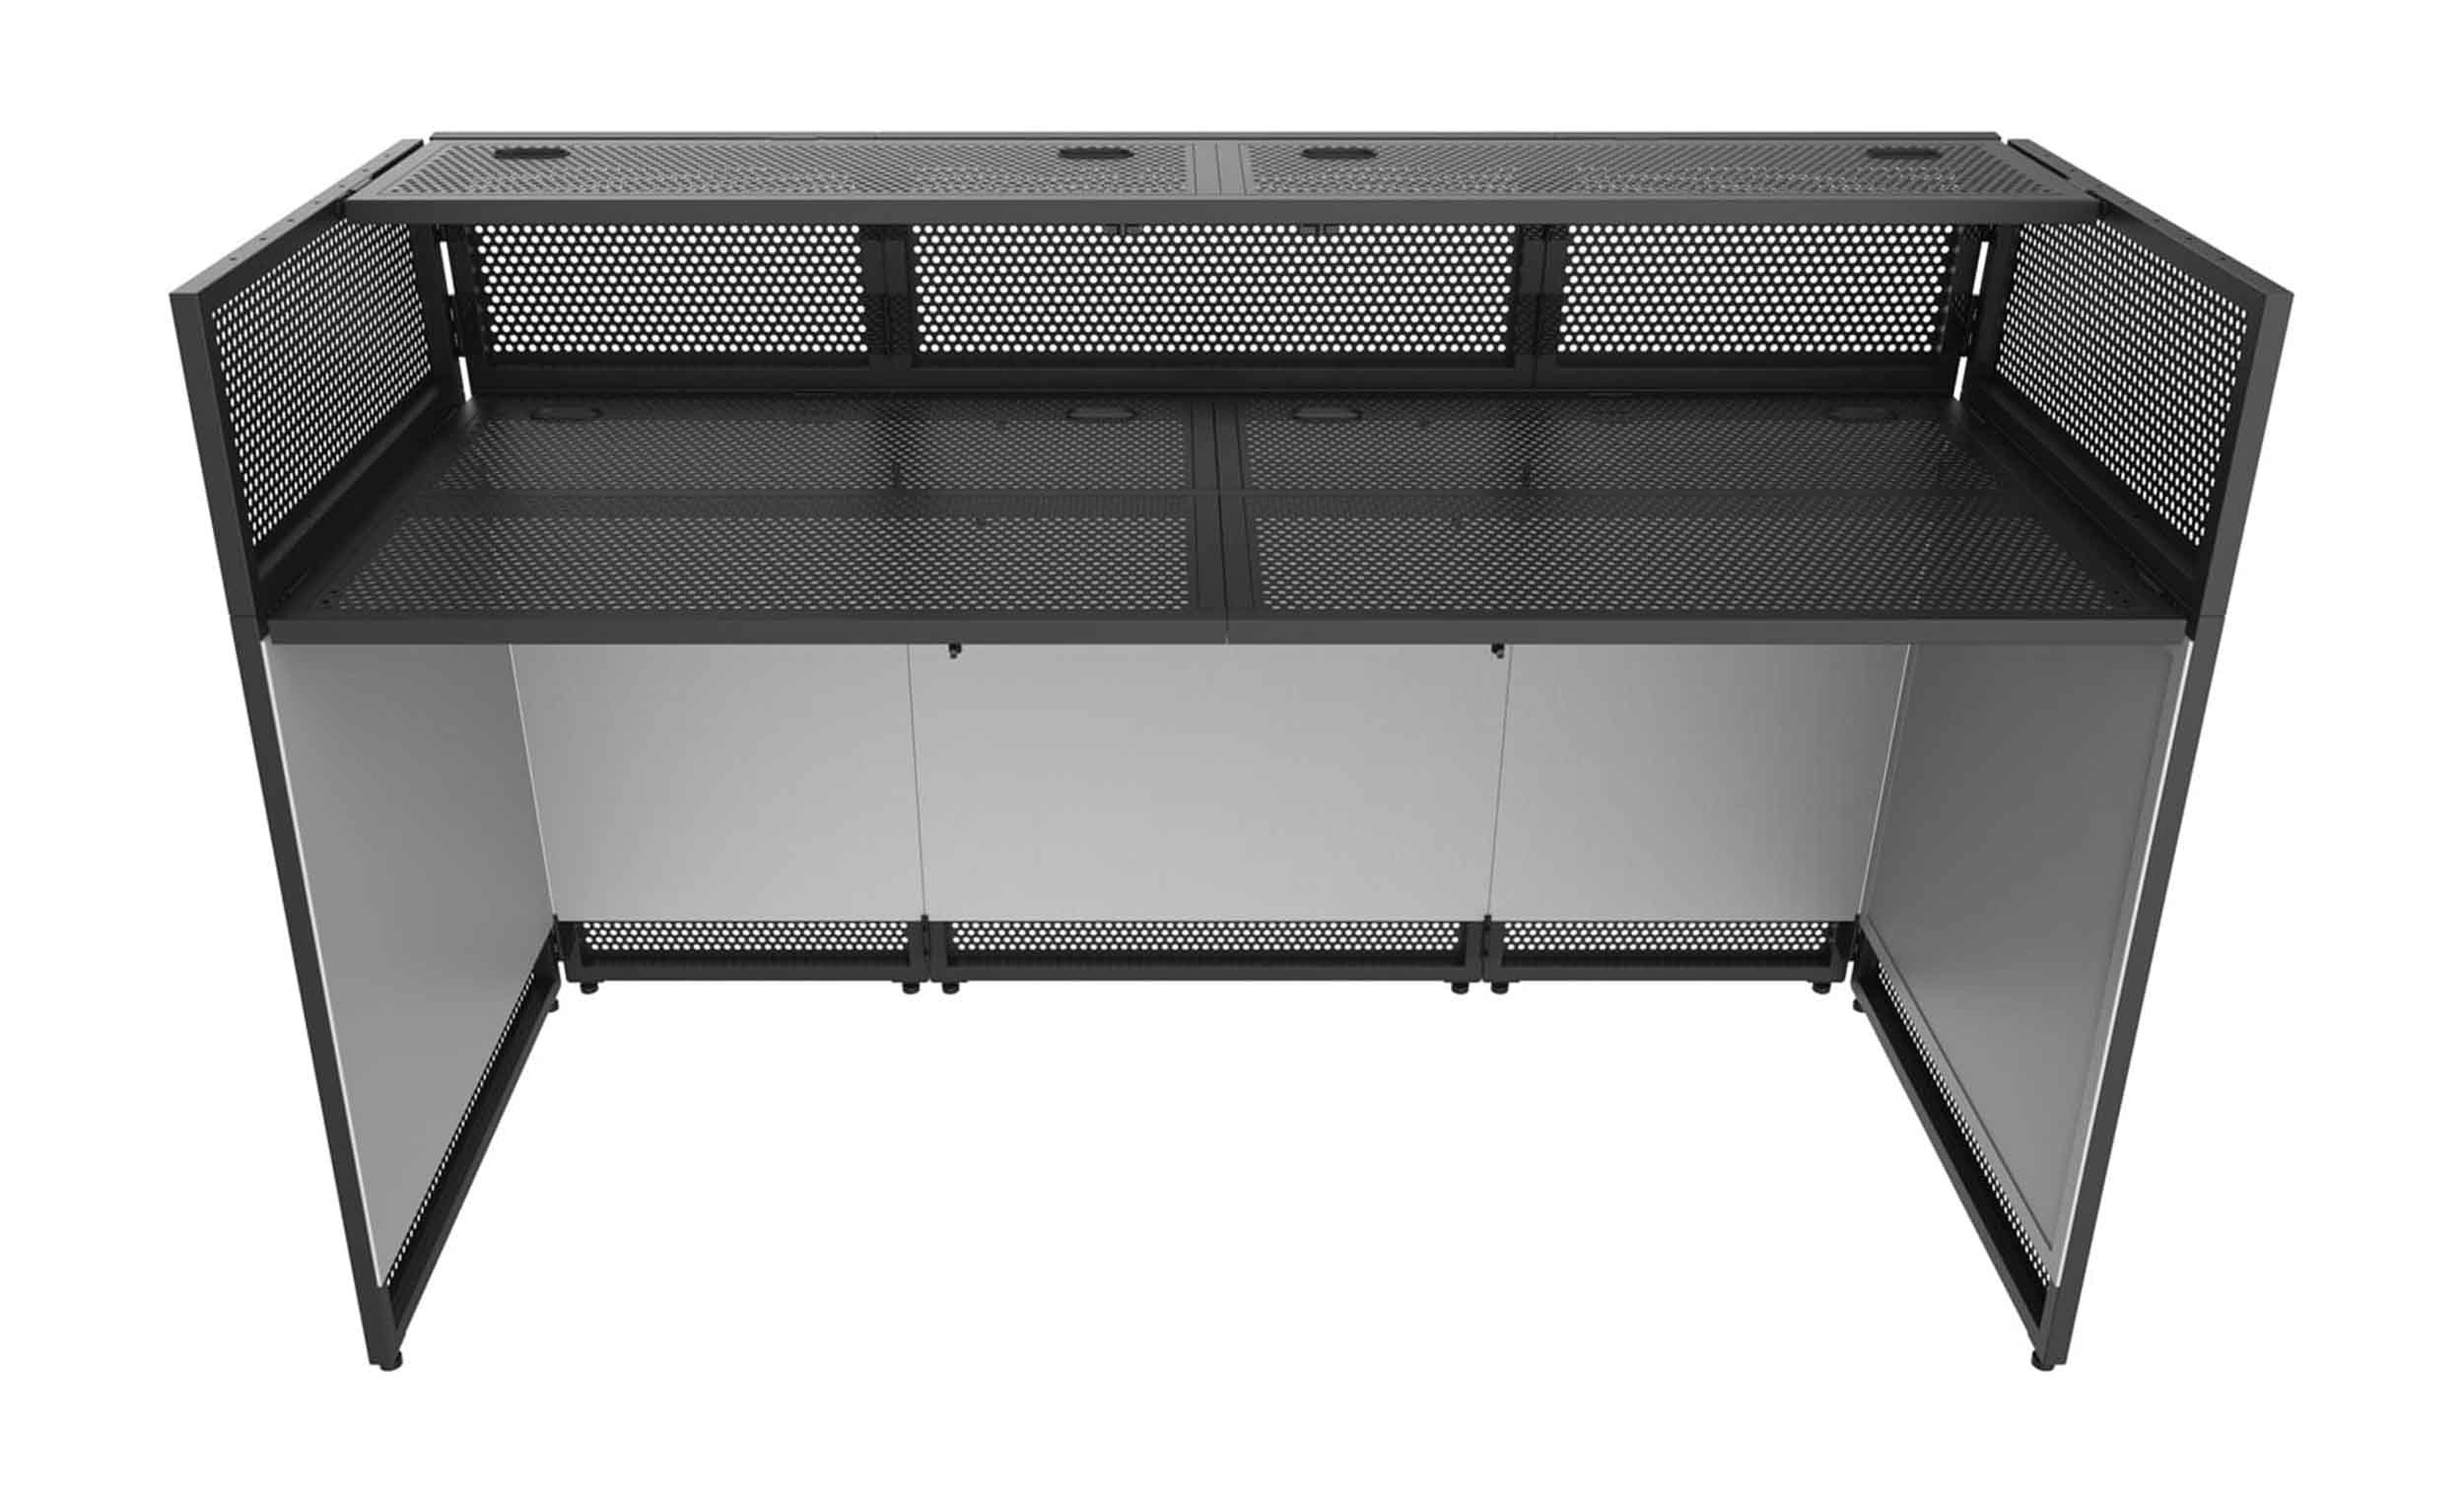 Odyssey DJBOOTHM78, 70-Inch Wide Surface TV Mountable DJ Battle Booth with Removable Top by Odyssey